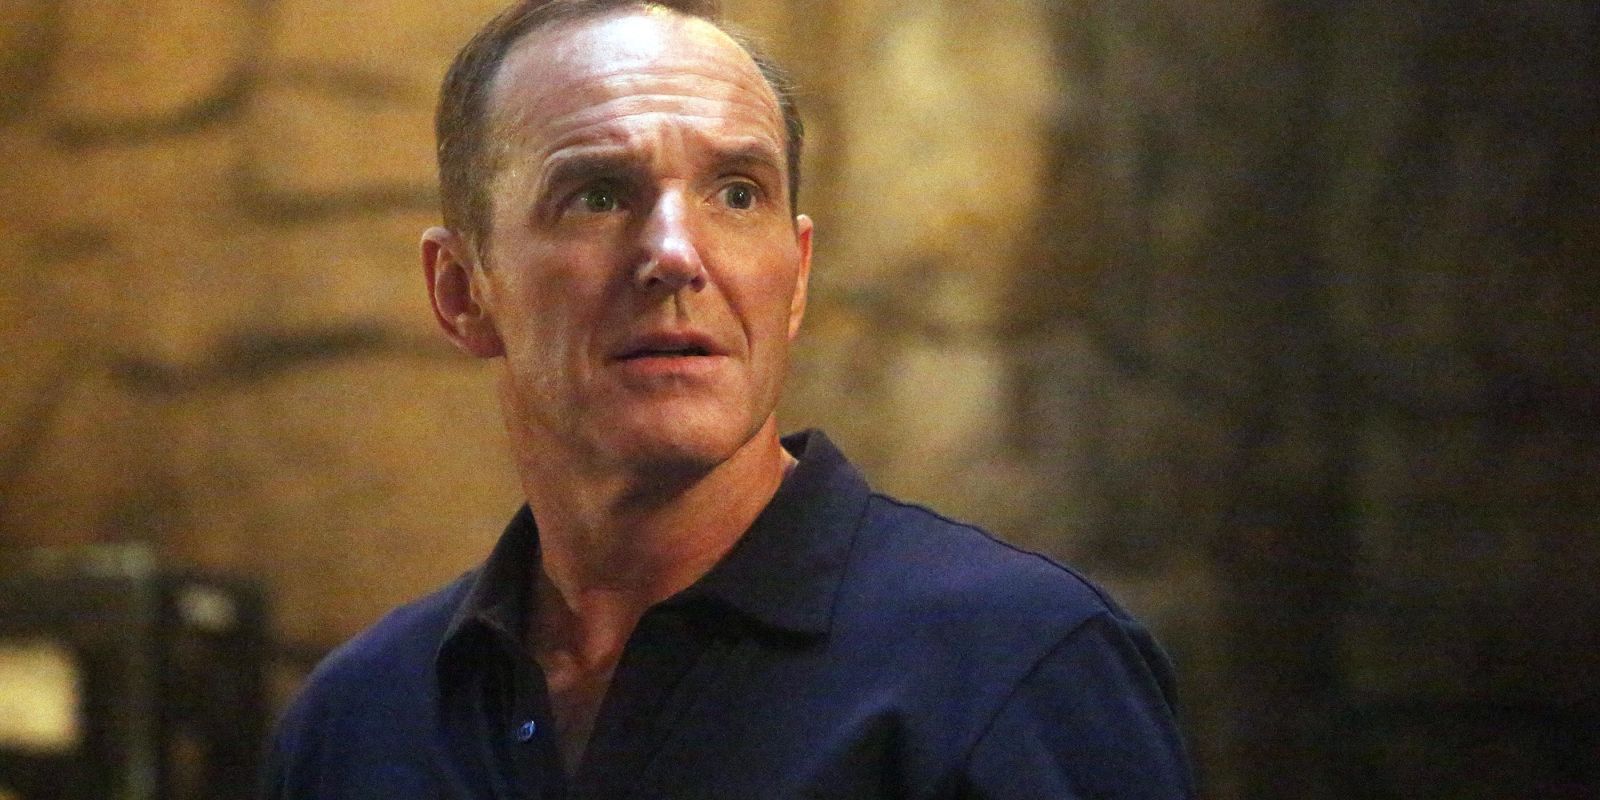 Clark Gregg as Phil Coulson in Agents of Shield